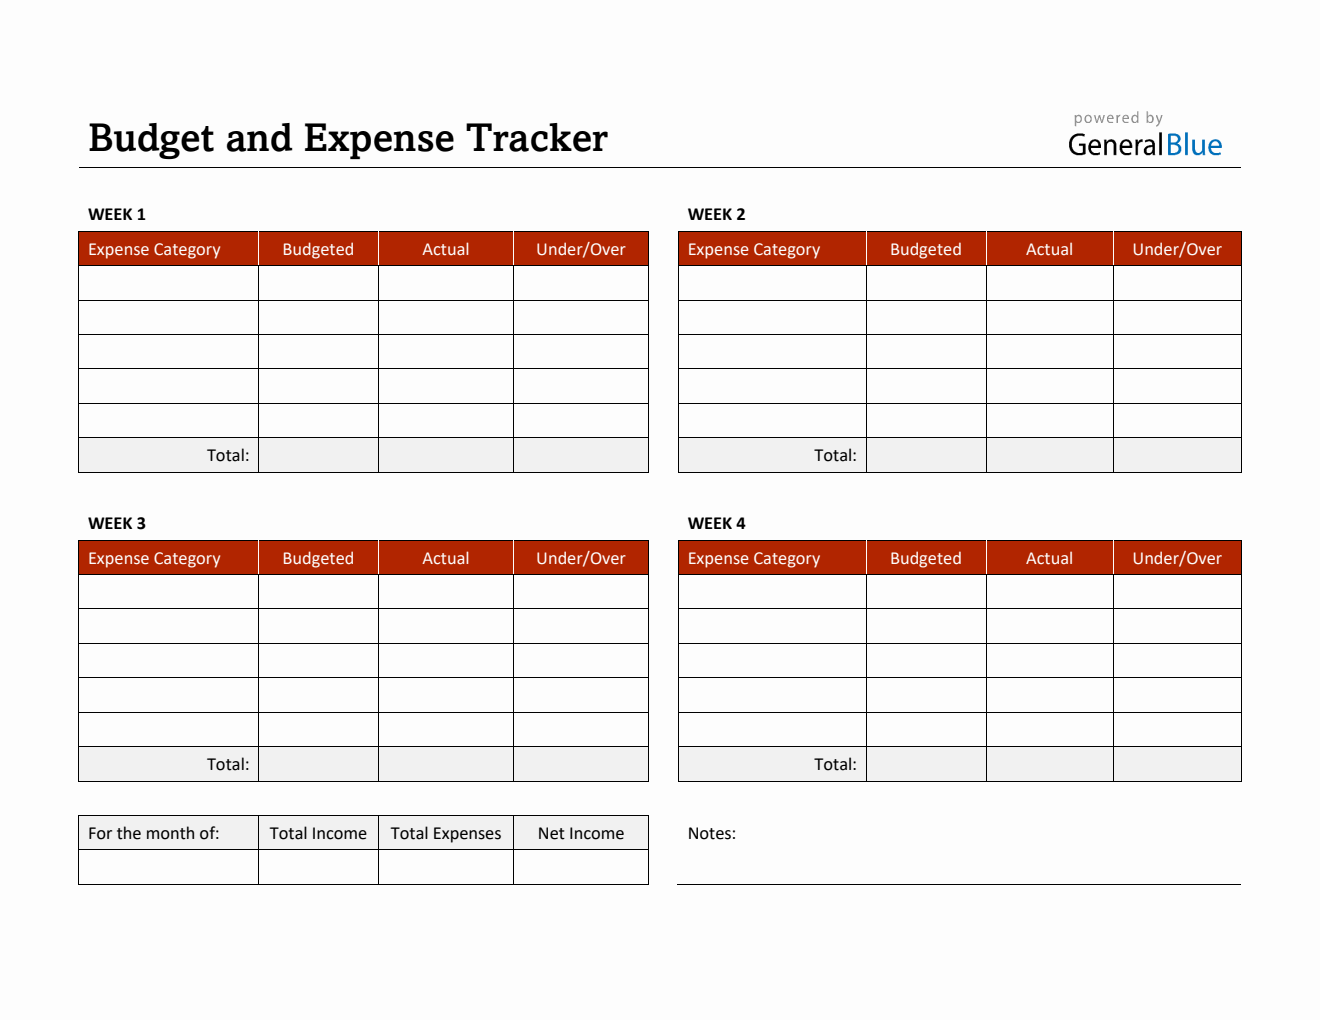 Budget and Expense Tracker in Word (Red)